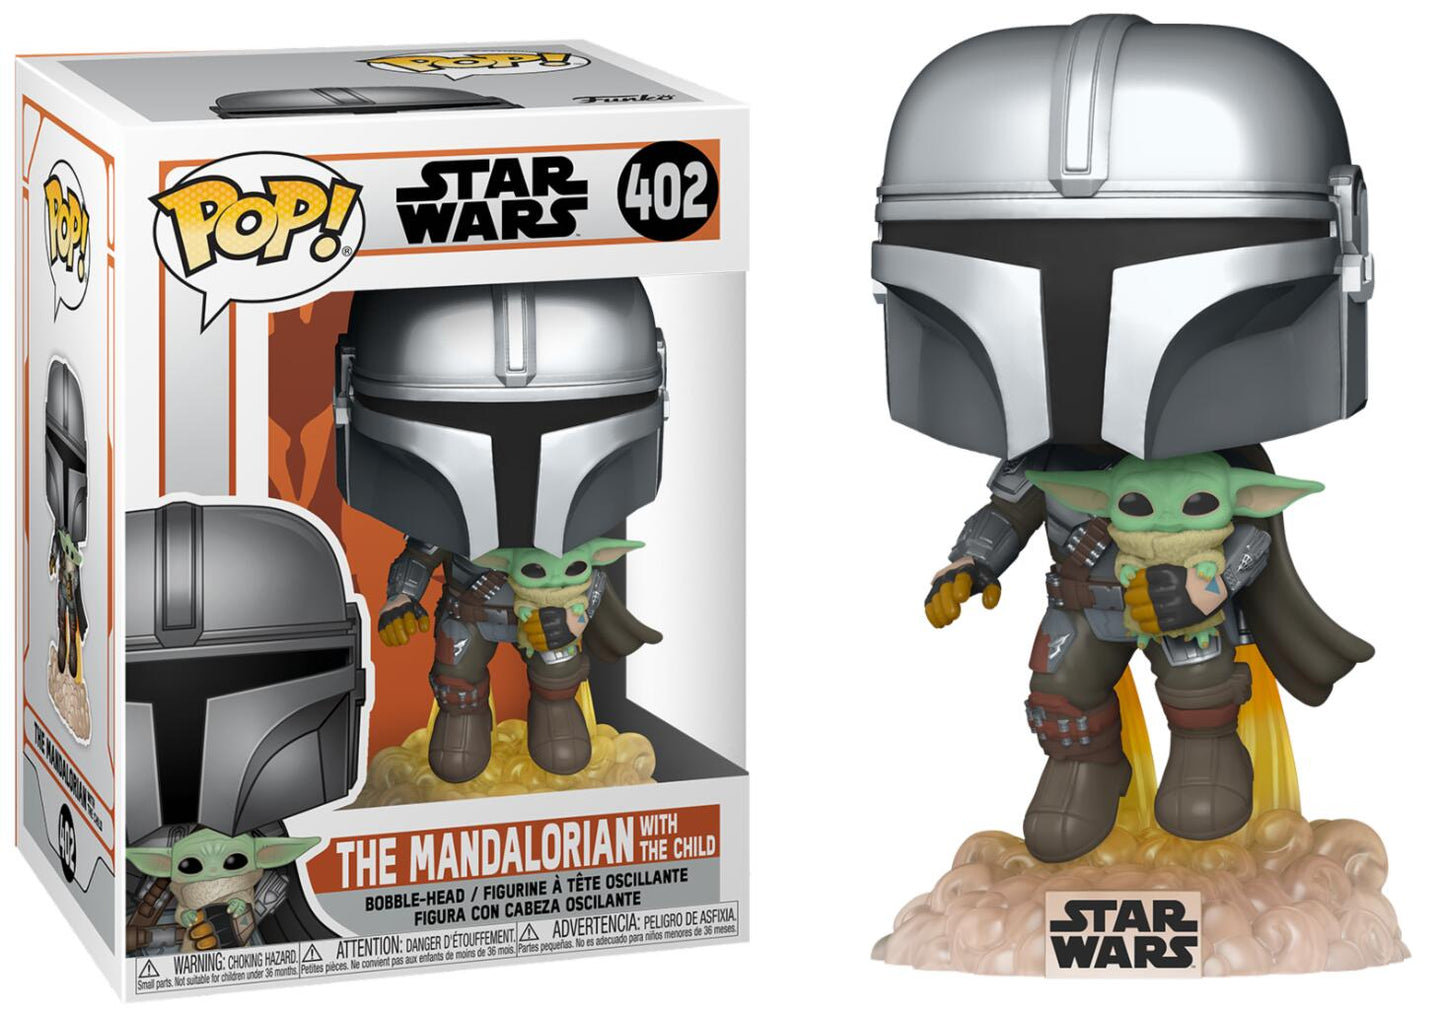 Pop! Star Wars: The Mandalorian - The Mandalorian With The Child #402